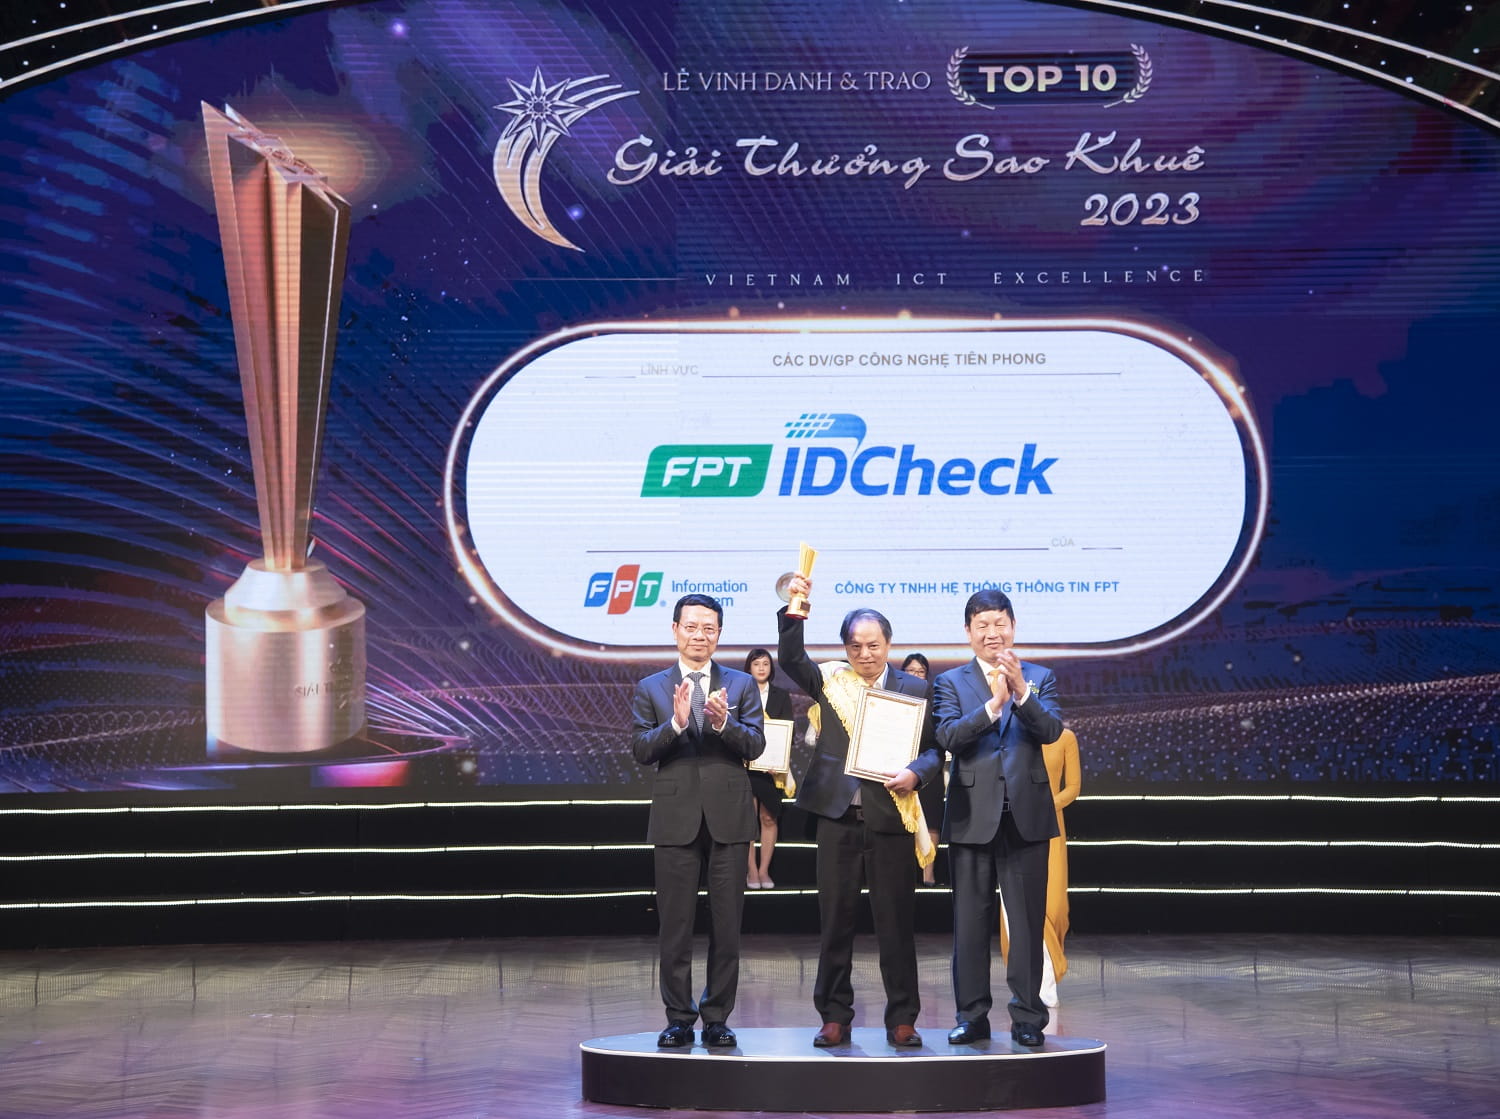 FPT.IDCheck - the digital authentication and anti-counterfeiting solution - was honored in the Top 10 Sao Khue.